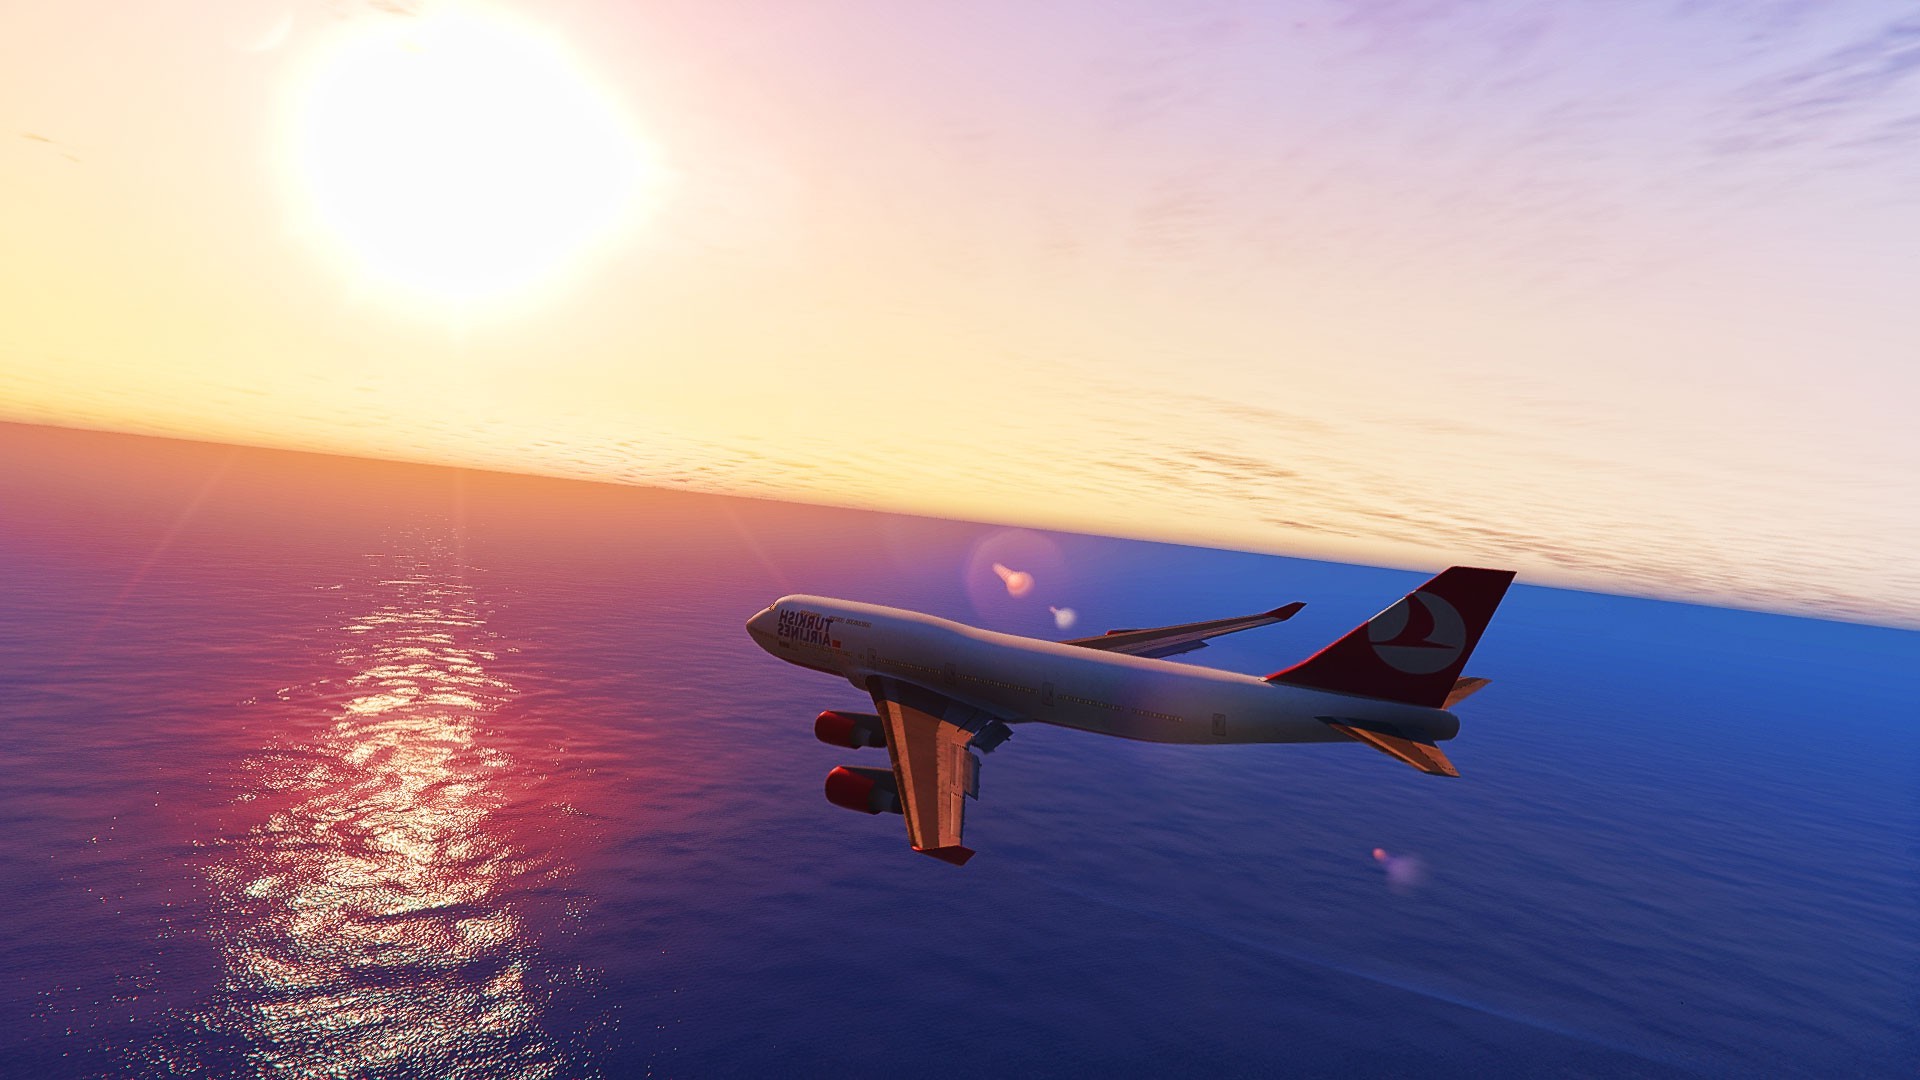 Grand Theft Auto V, PC Gaming, Turkish Airlines, Trevor Philips, Video Games, Aircraft Wallpaper